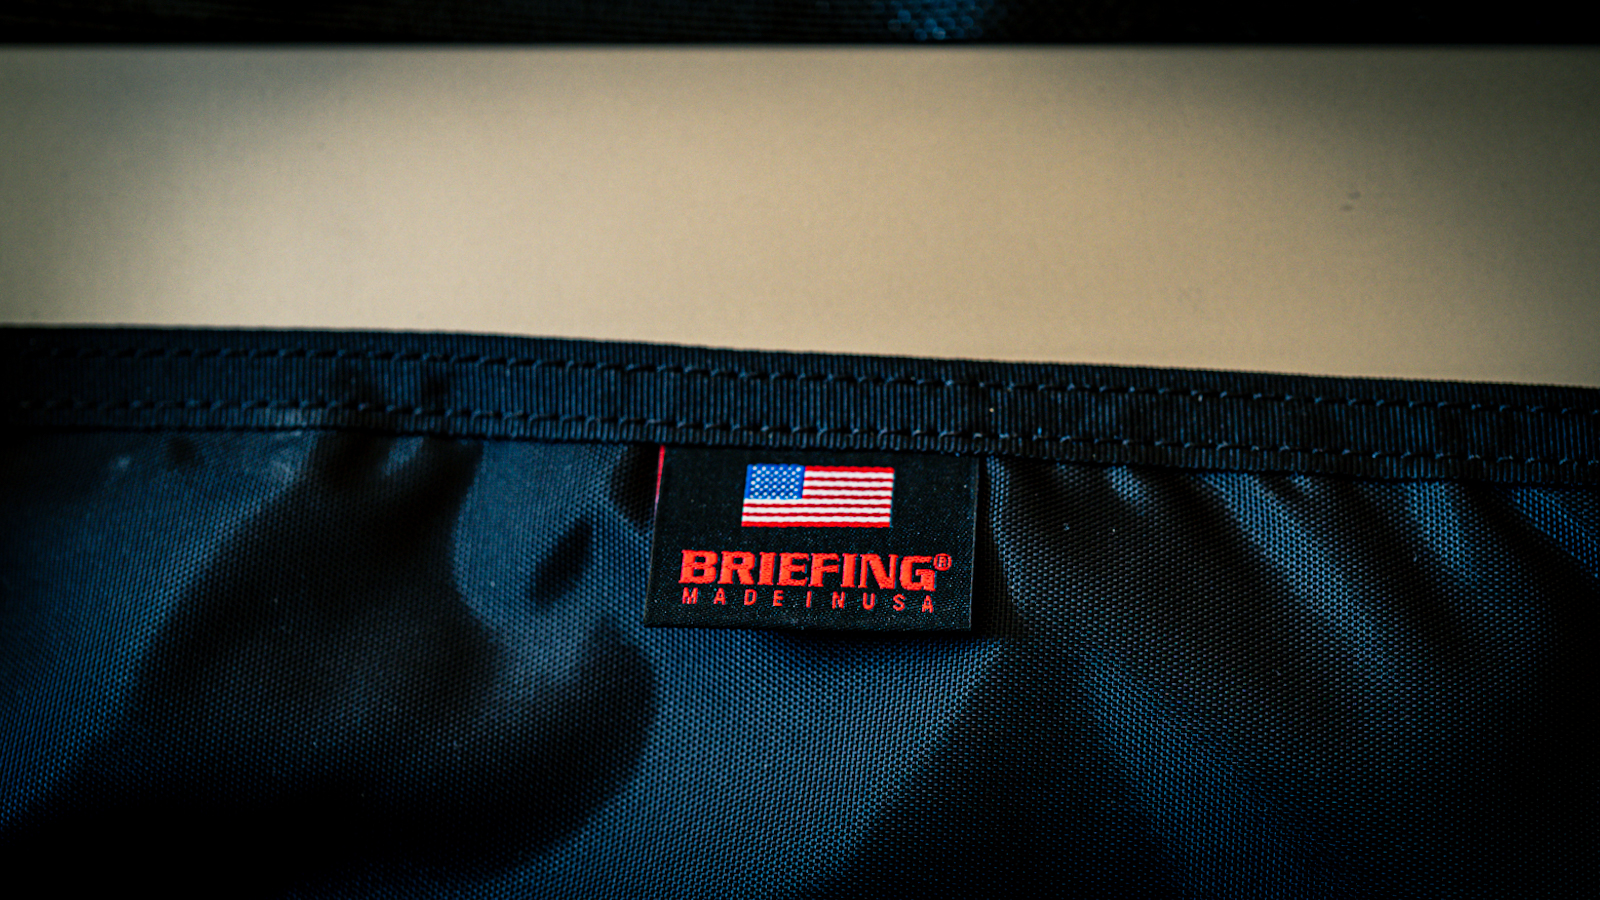 BRIEFING Expands With Their New Made in USA Collection